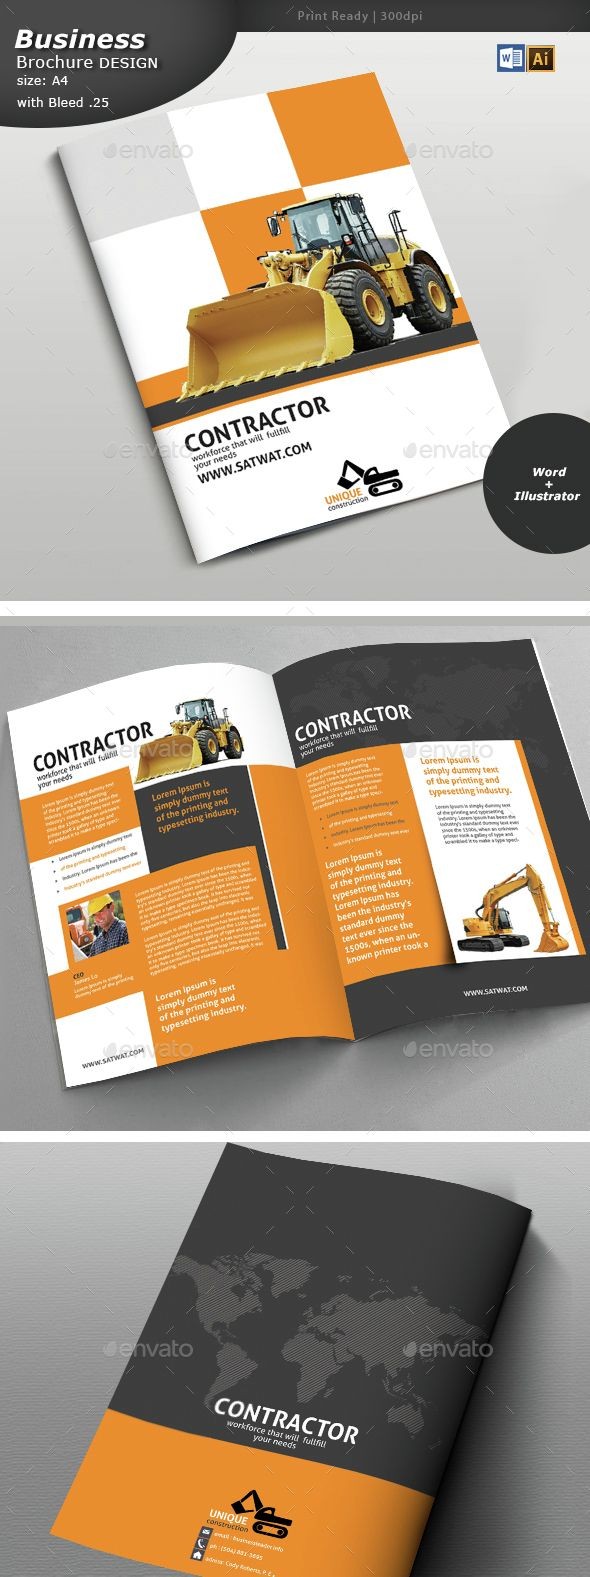 Construction Brochure Design Brochures Graphics And Magazine Layouts Ideas